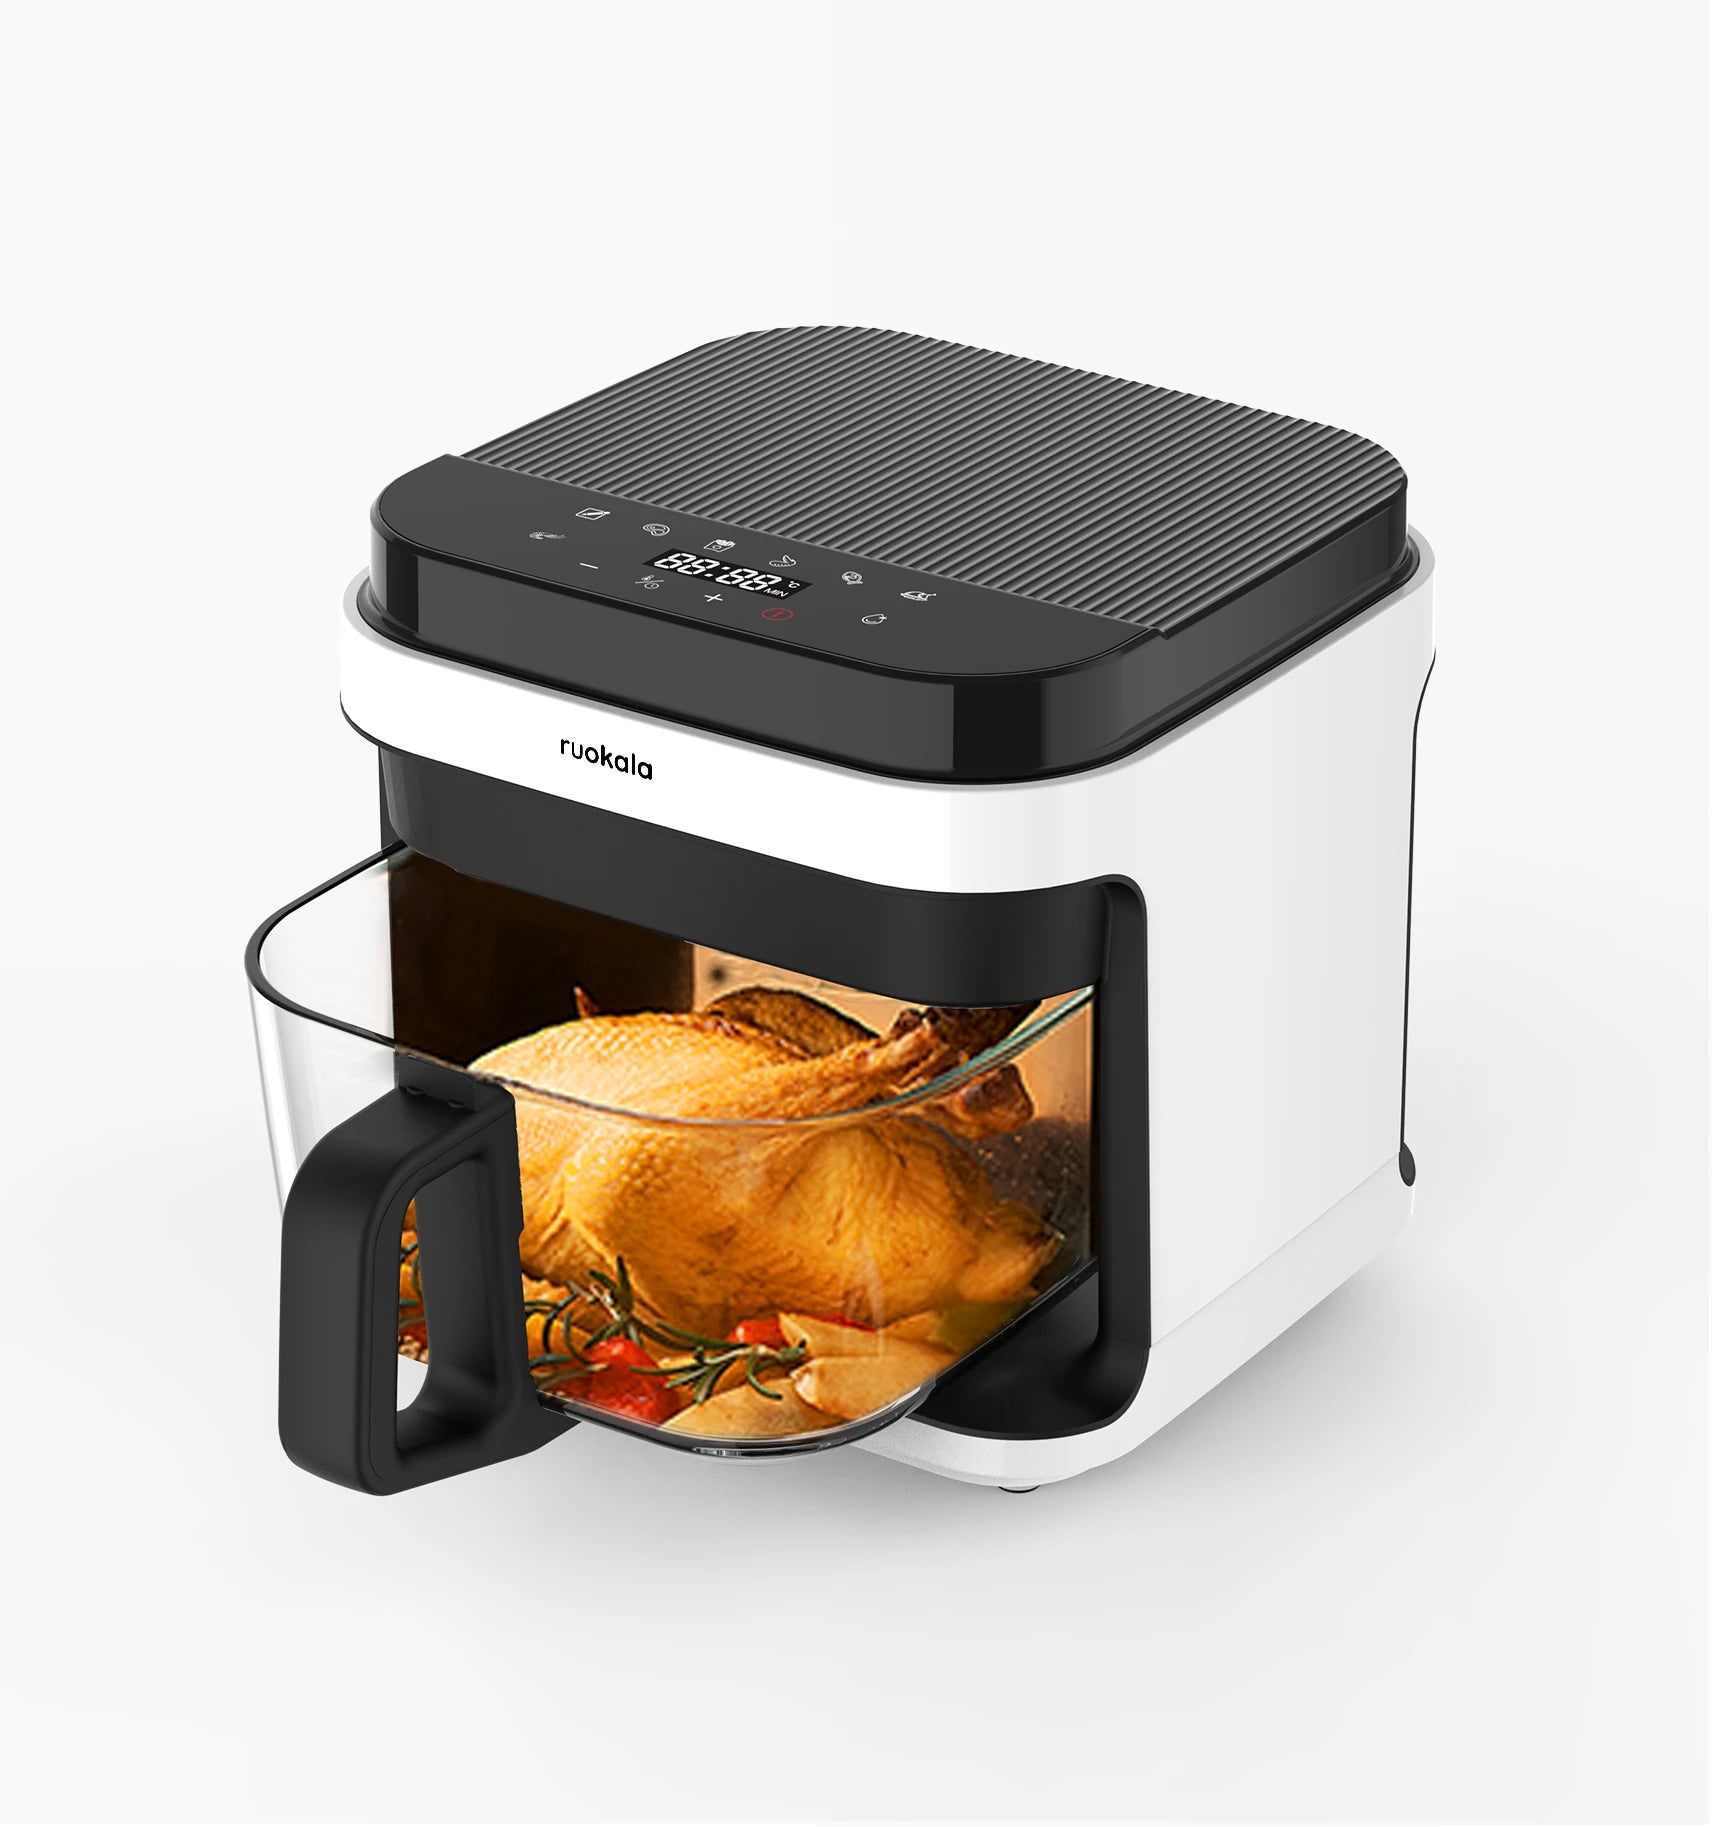 Ruokala air fryer featuring a perfectly roasted golden-brown chicken, highlighting the appliance's roasting capabilities and sleek black and white design.